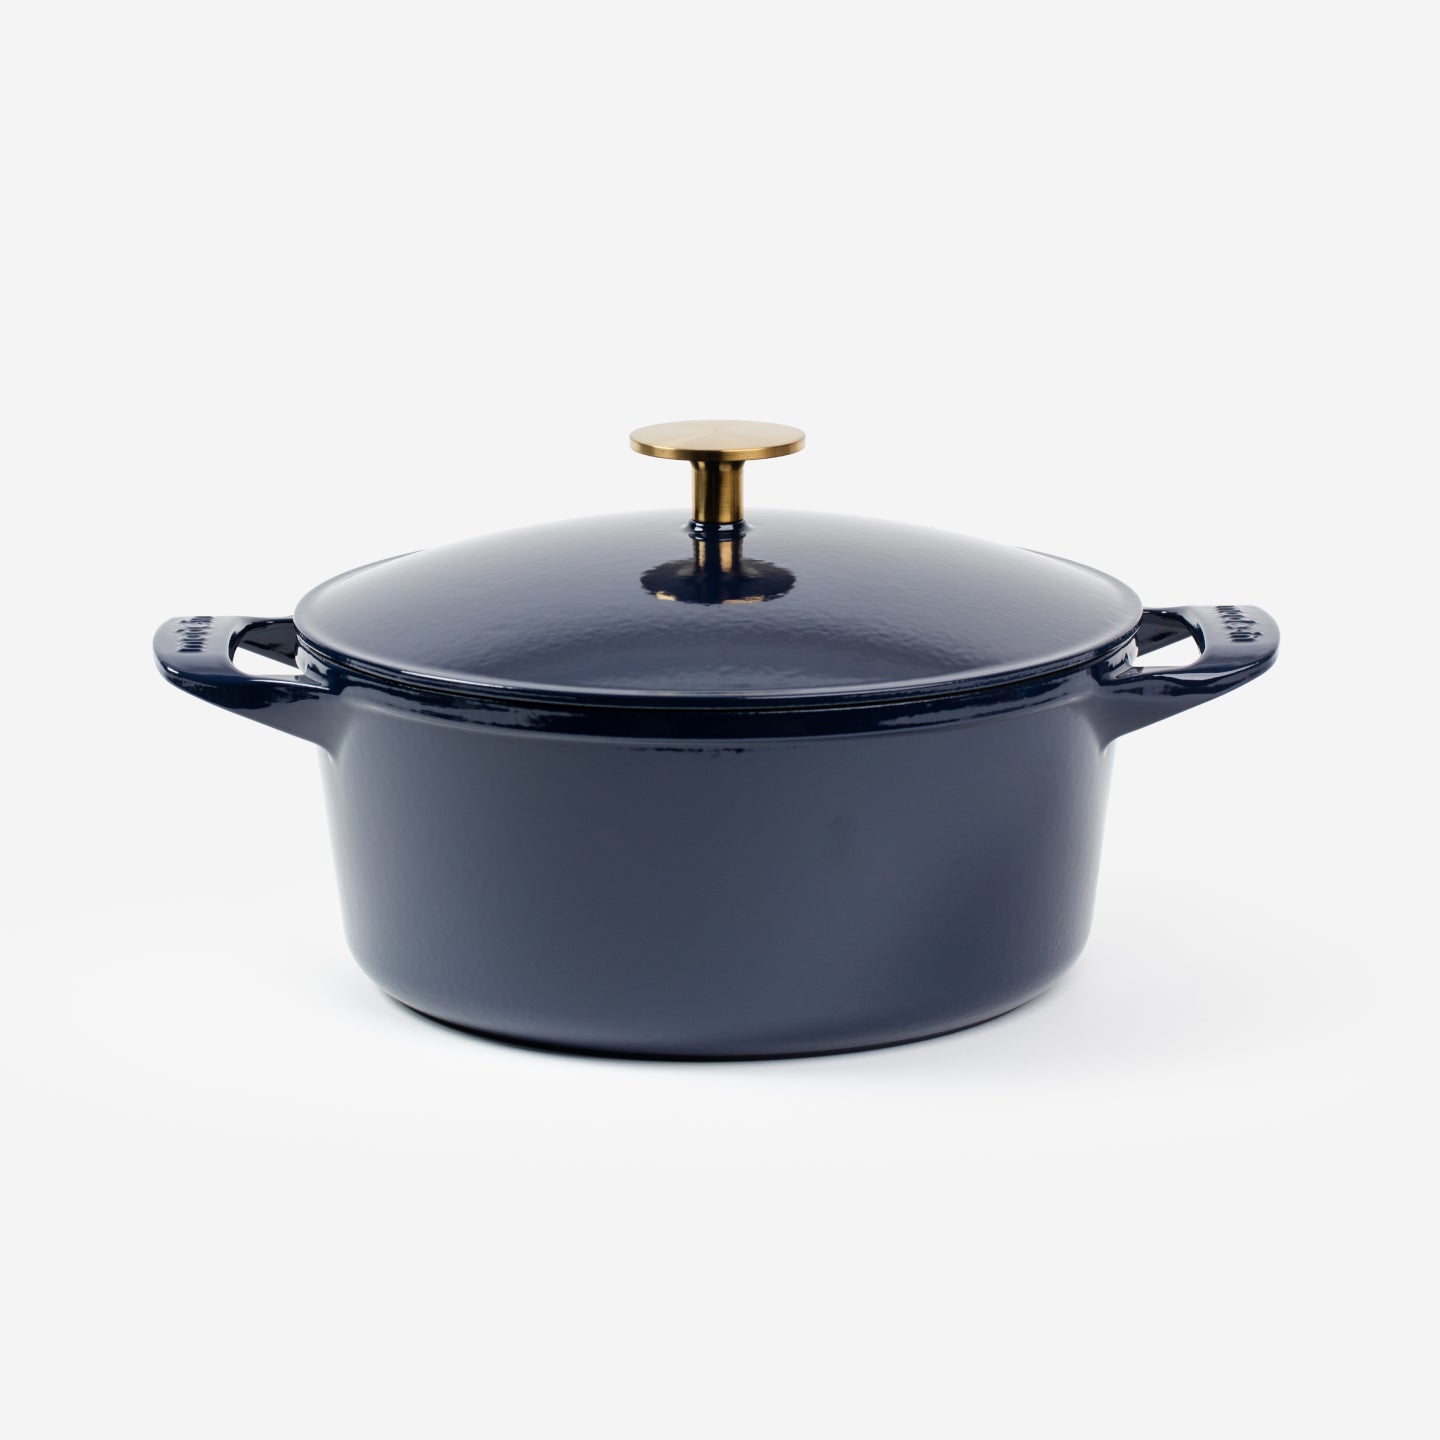 Enameled Cast Iron Dutch Oven | 5.5 Quart | Made In